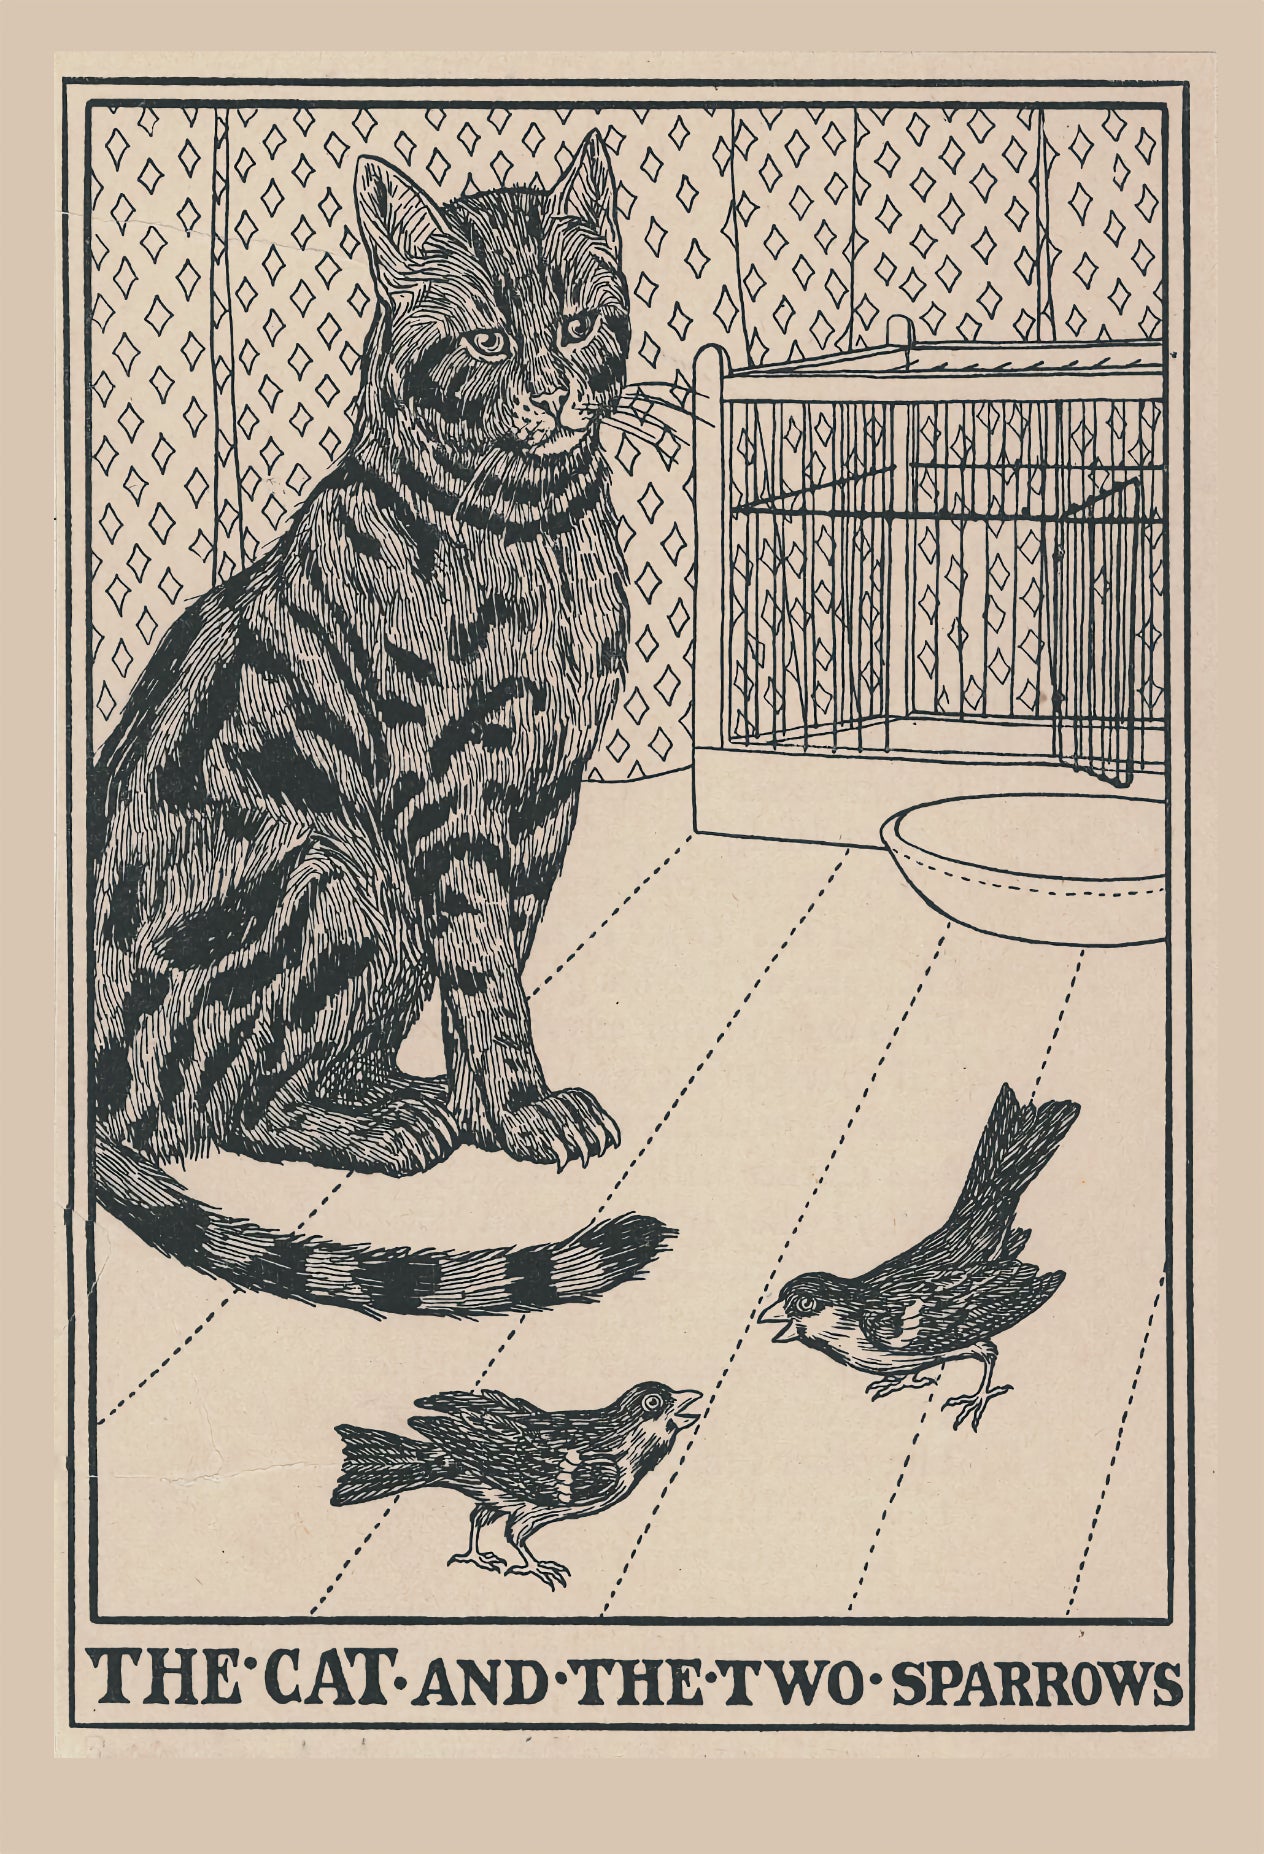 The Cat and Two Sparrows by Percy J. Billinghurst, 1900 - Postcard